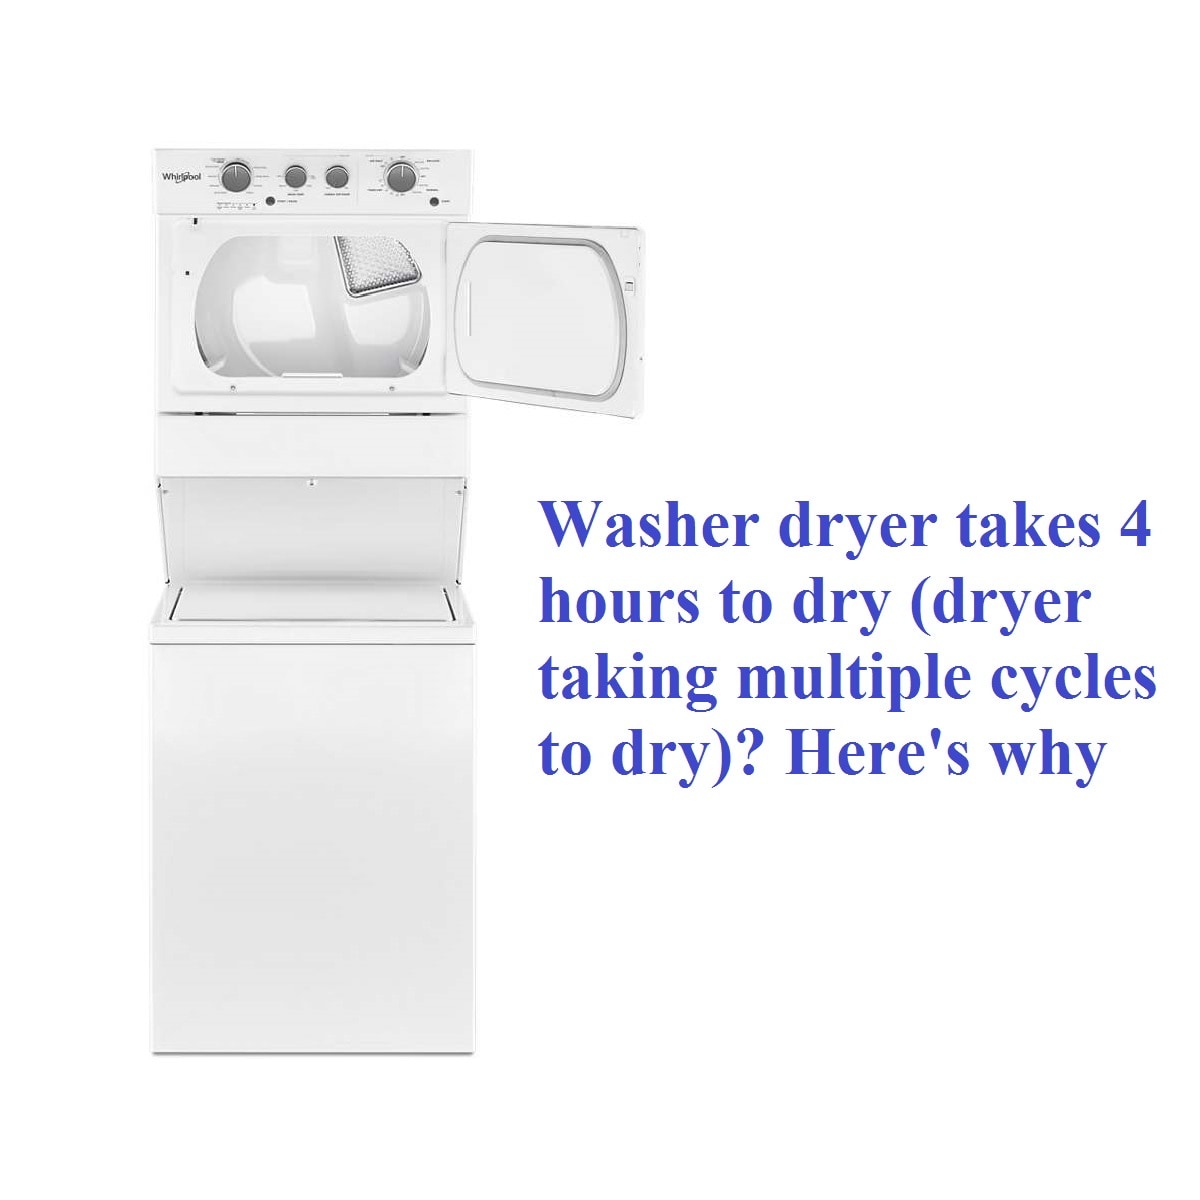 Washer dryer takes 4 hours to dry